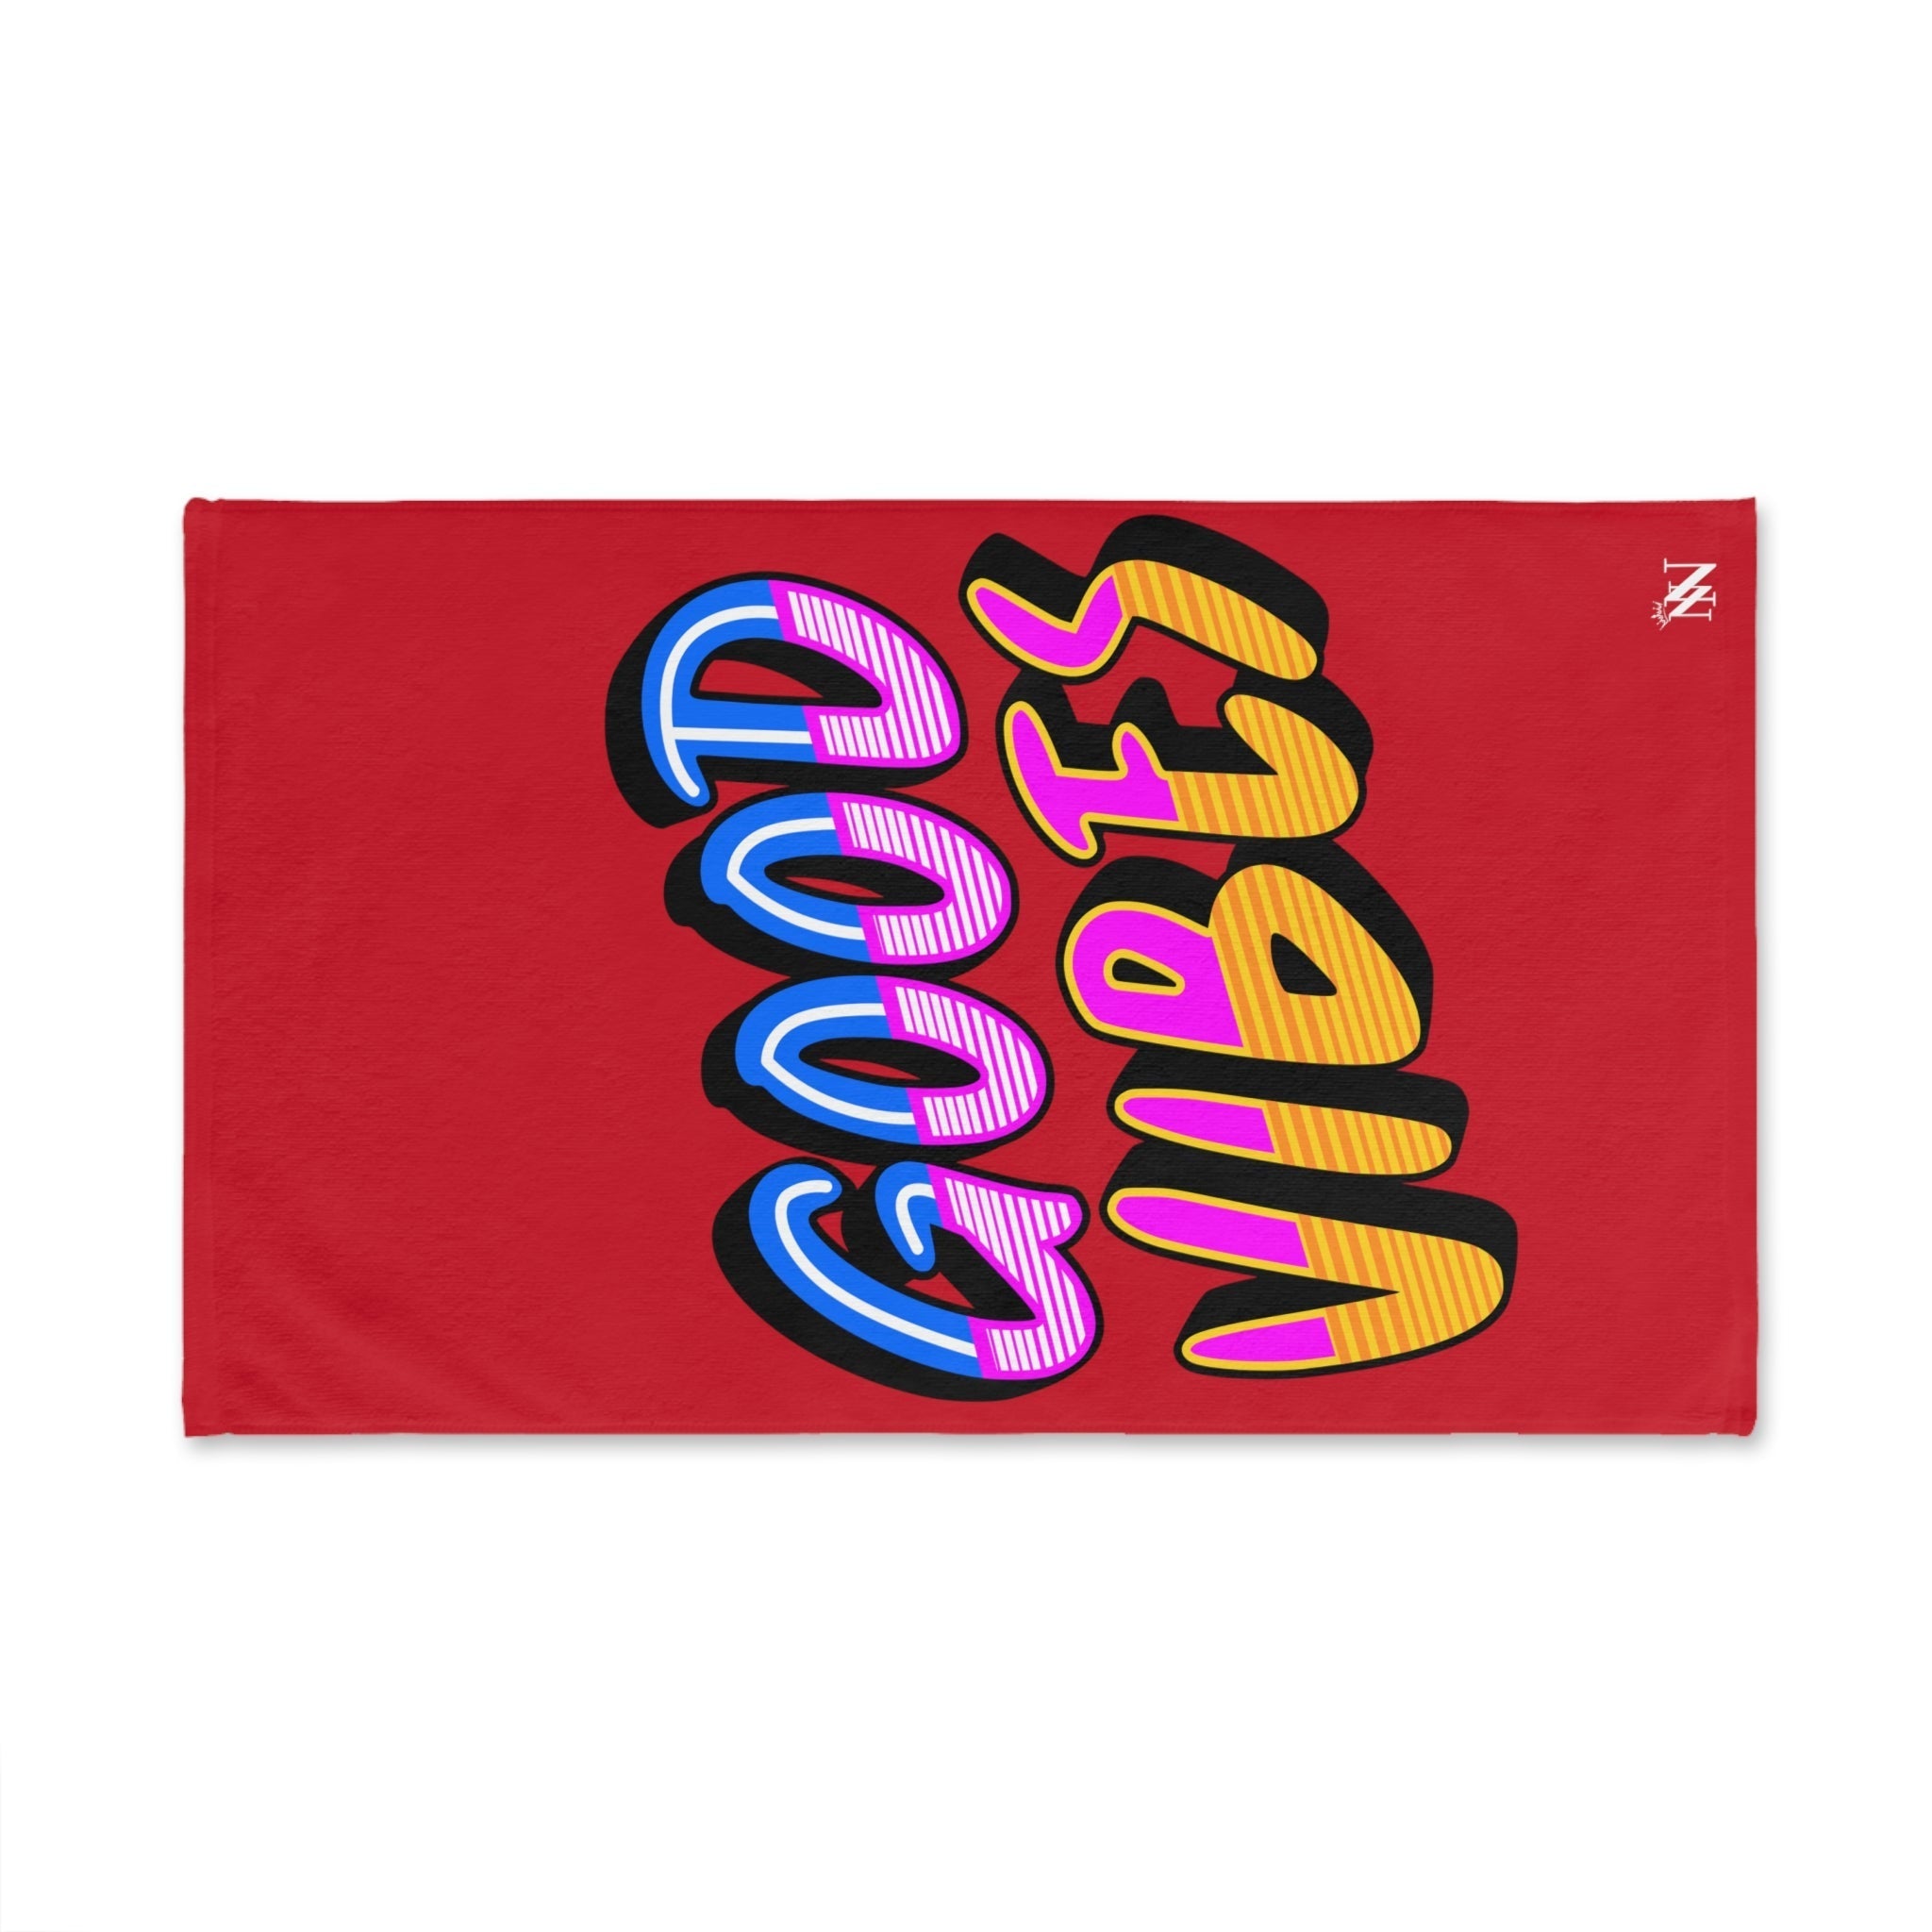 Neon Rainbow Vibes Red | Sexy Gifts for Boyfriend, Funny Towel Romantic Gift for Wedding Couple Fiance First Year 2nd Anniversary Valentines, Party Gag Gifts, Joke Humor Cloth for Husband Men BF NECTAR NAPKINS